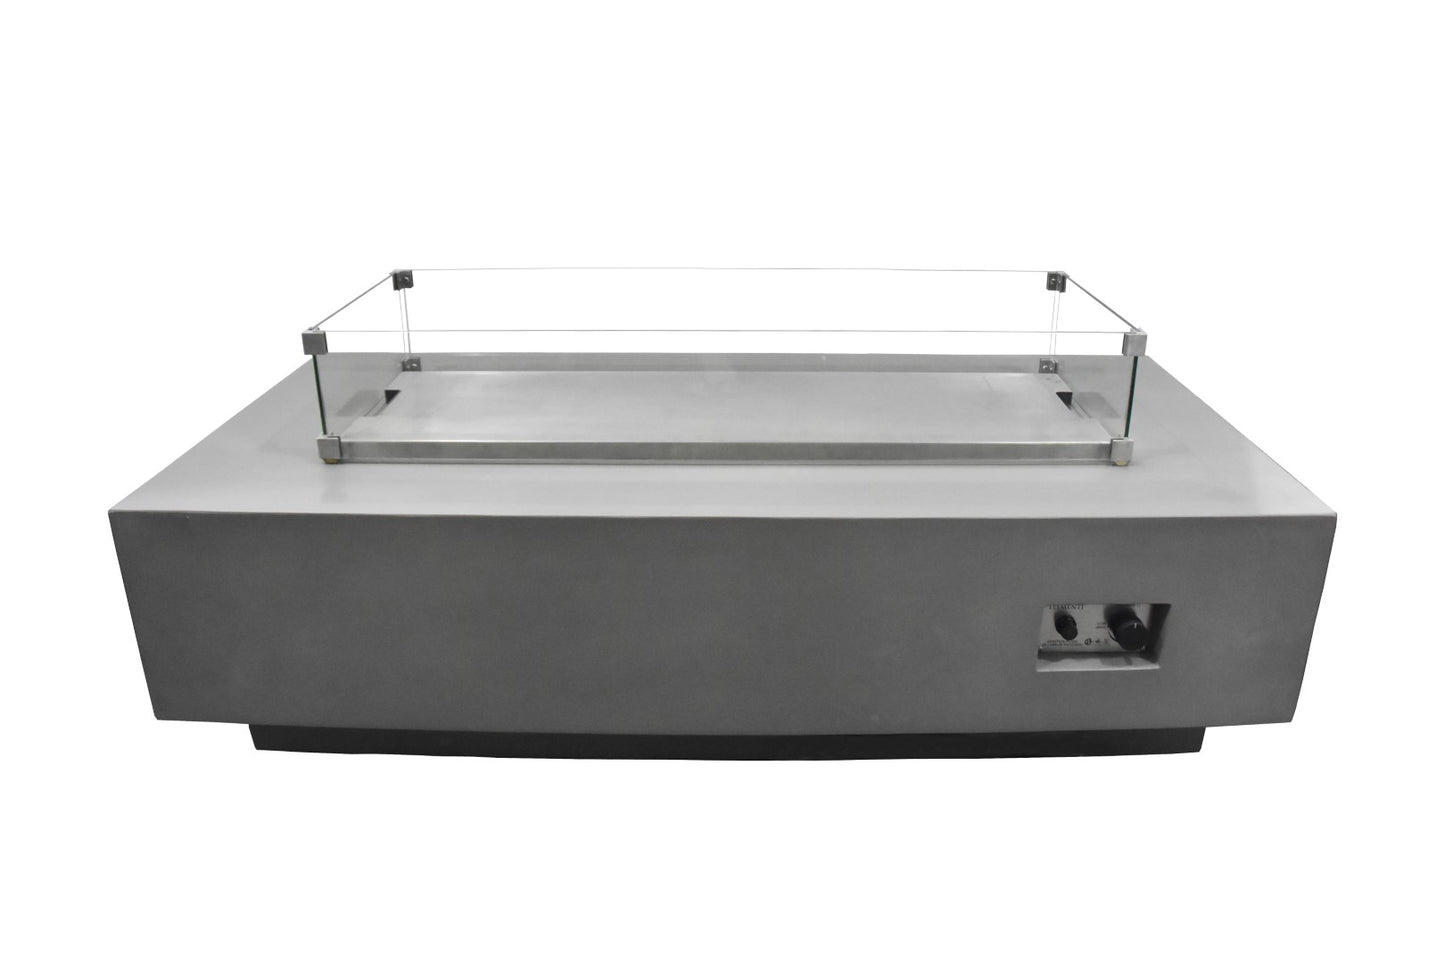 42" x 12" Fire Table Stainless Steel Lid